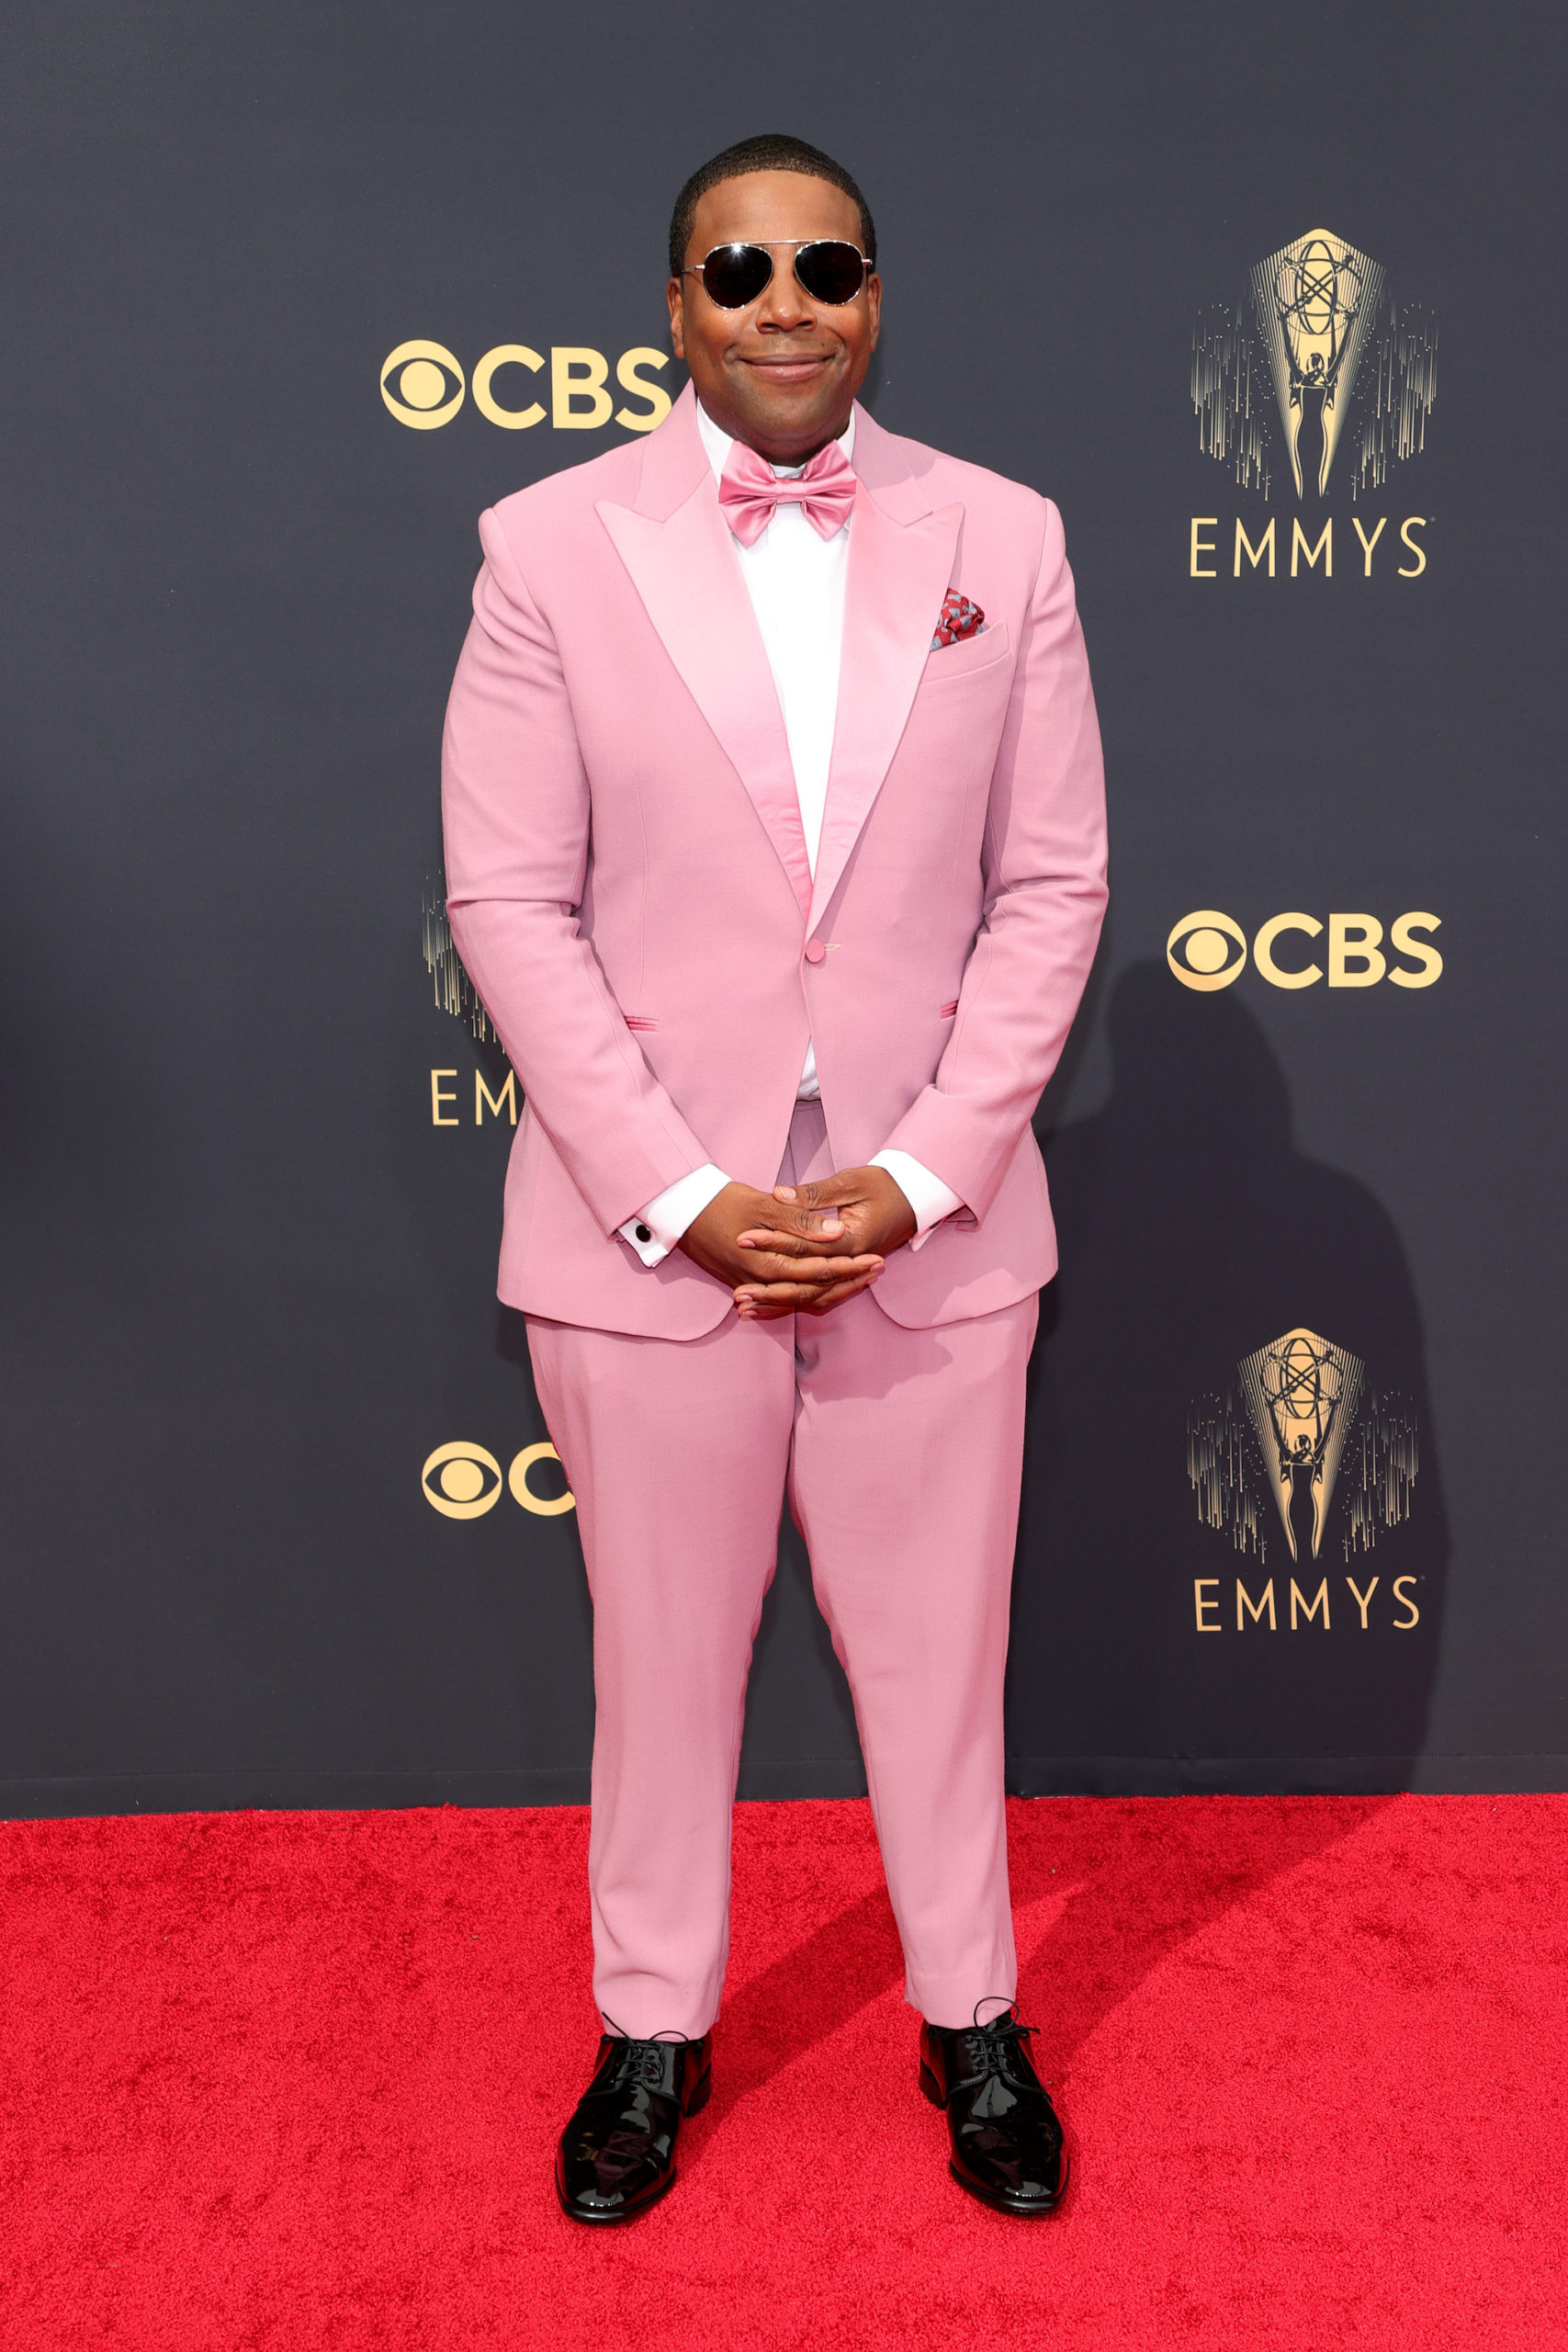 Kenan Thompson at the 2021 Emmys